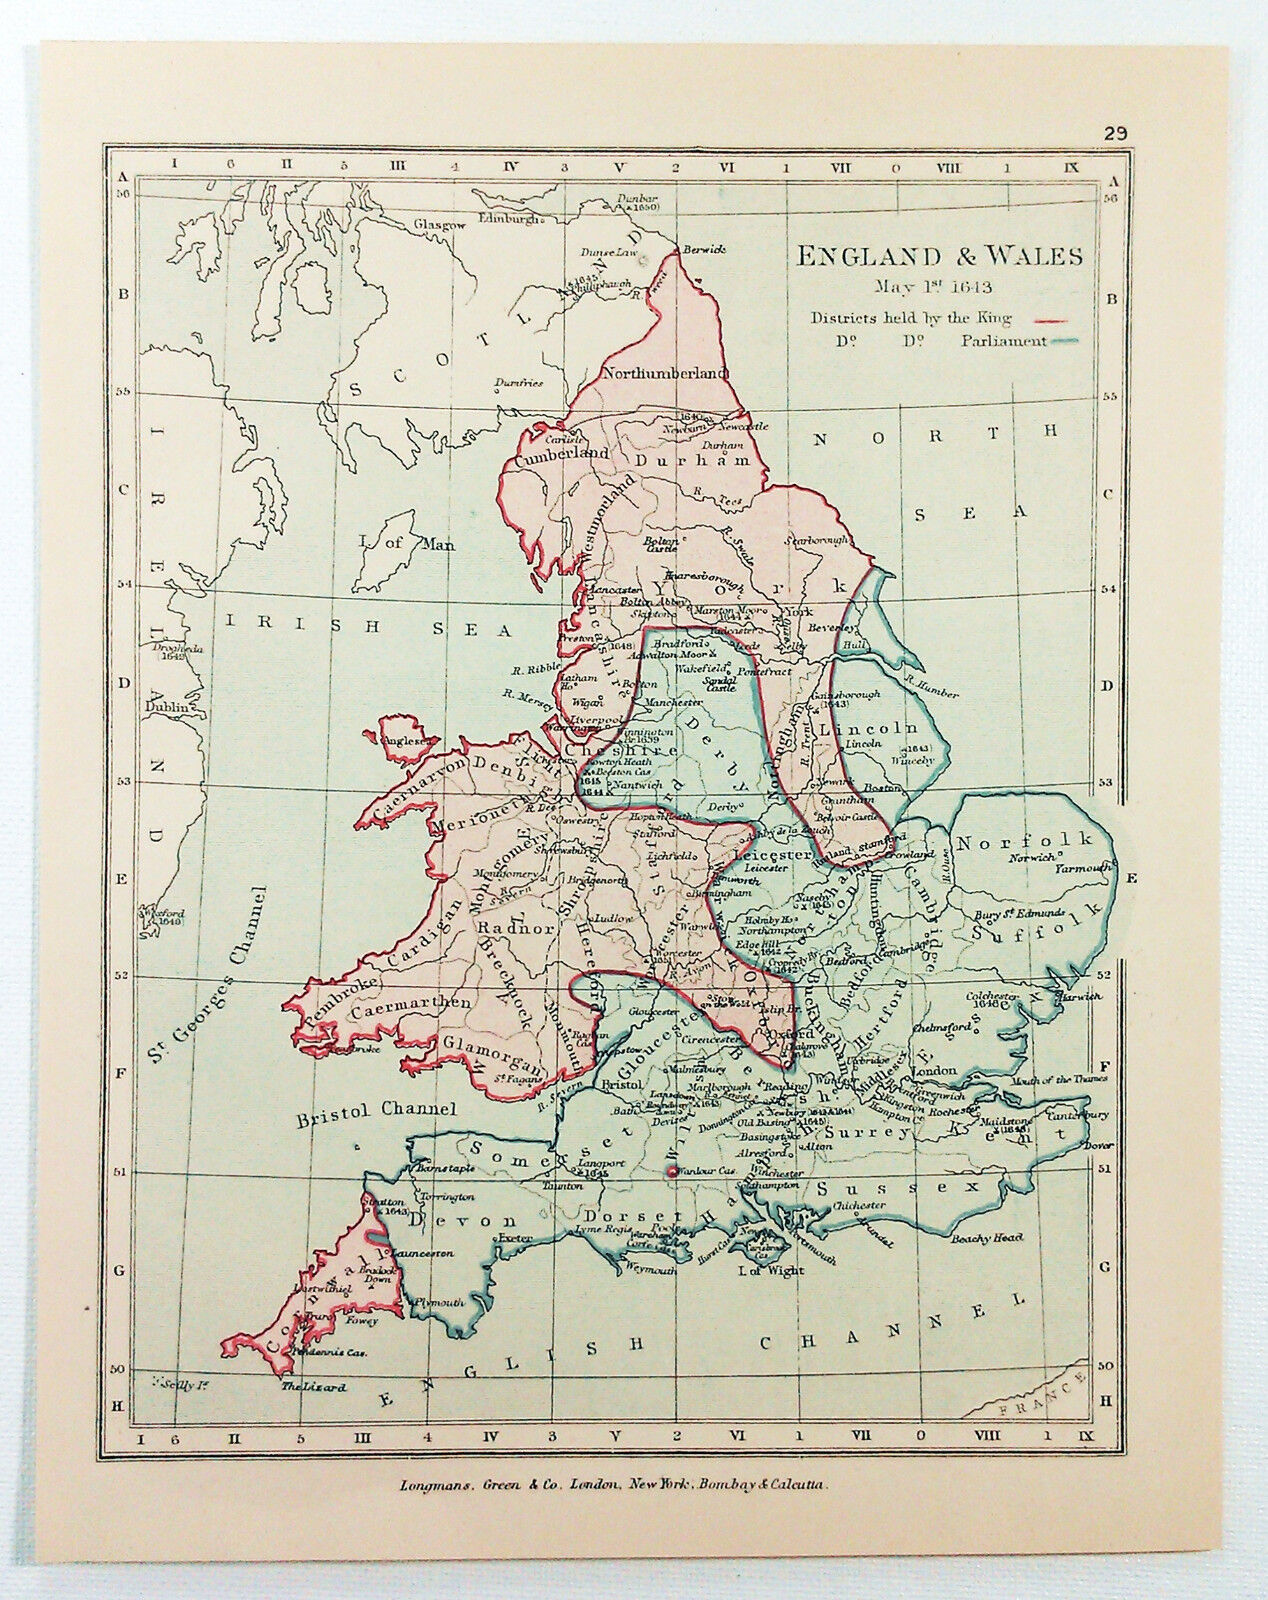 Vintage Map of England & Wales on May 1, 1643 by Longmans Green 1914